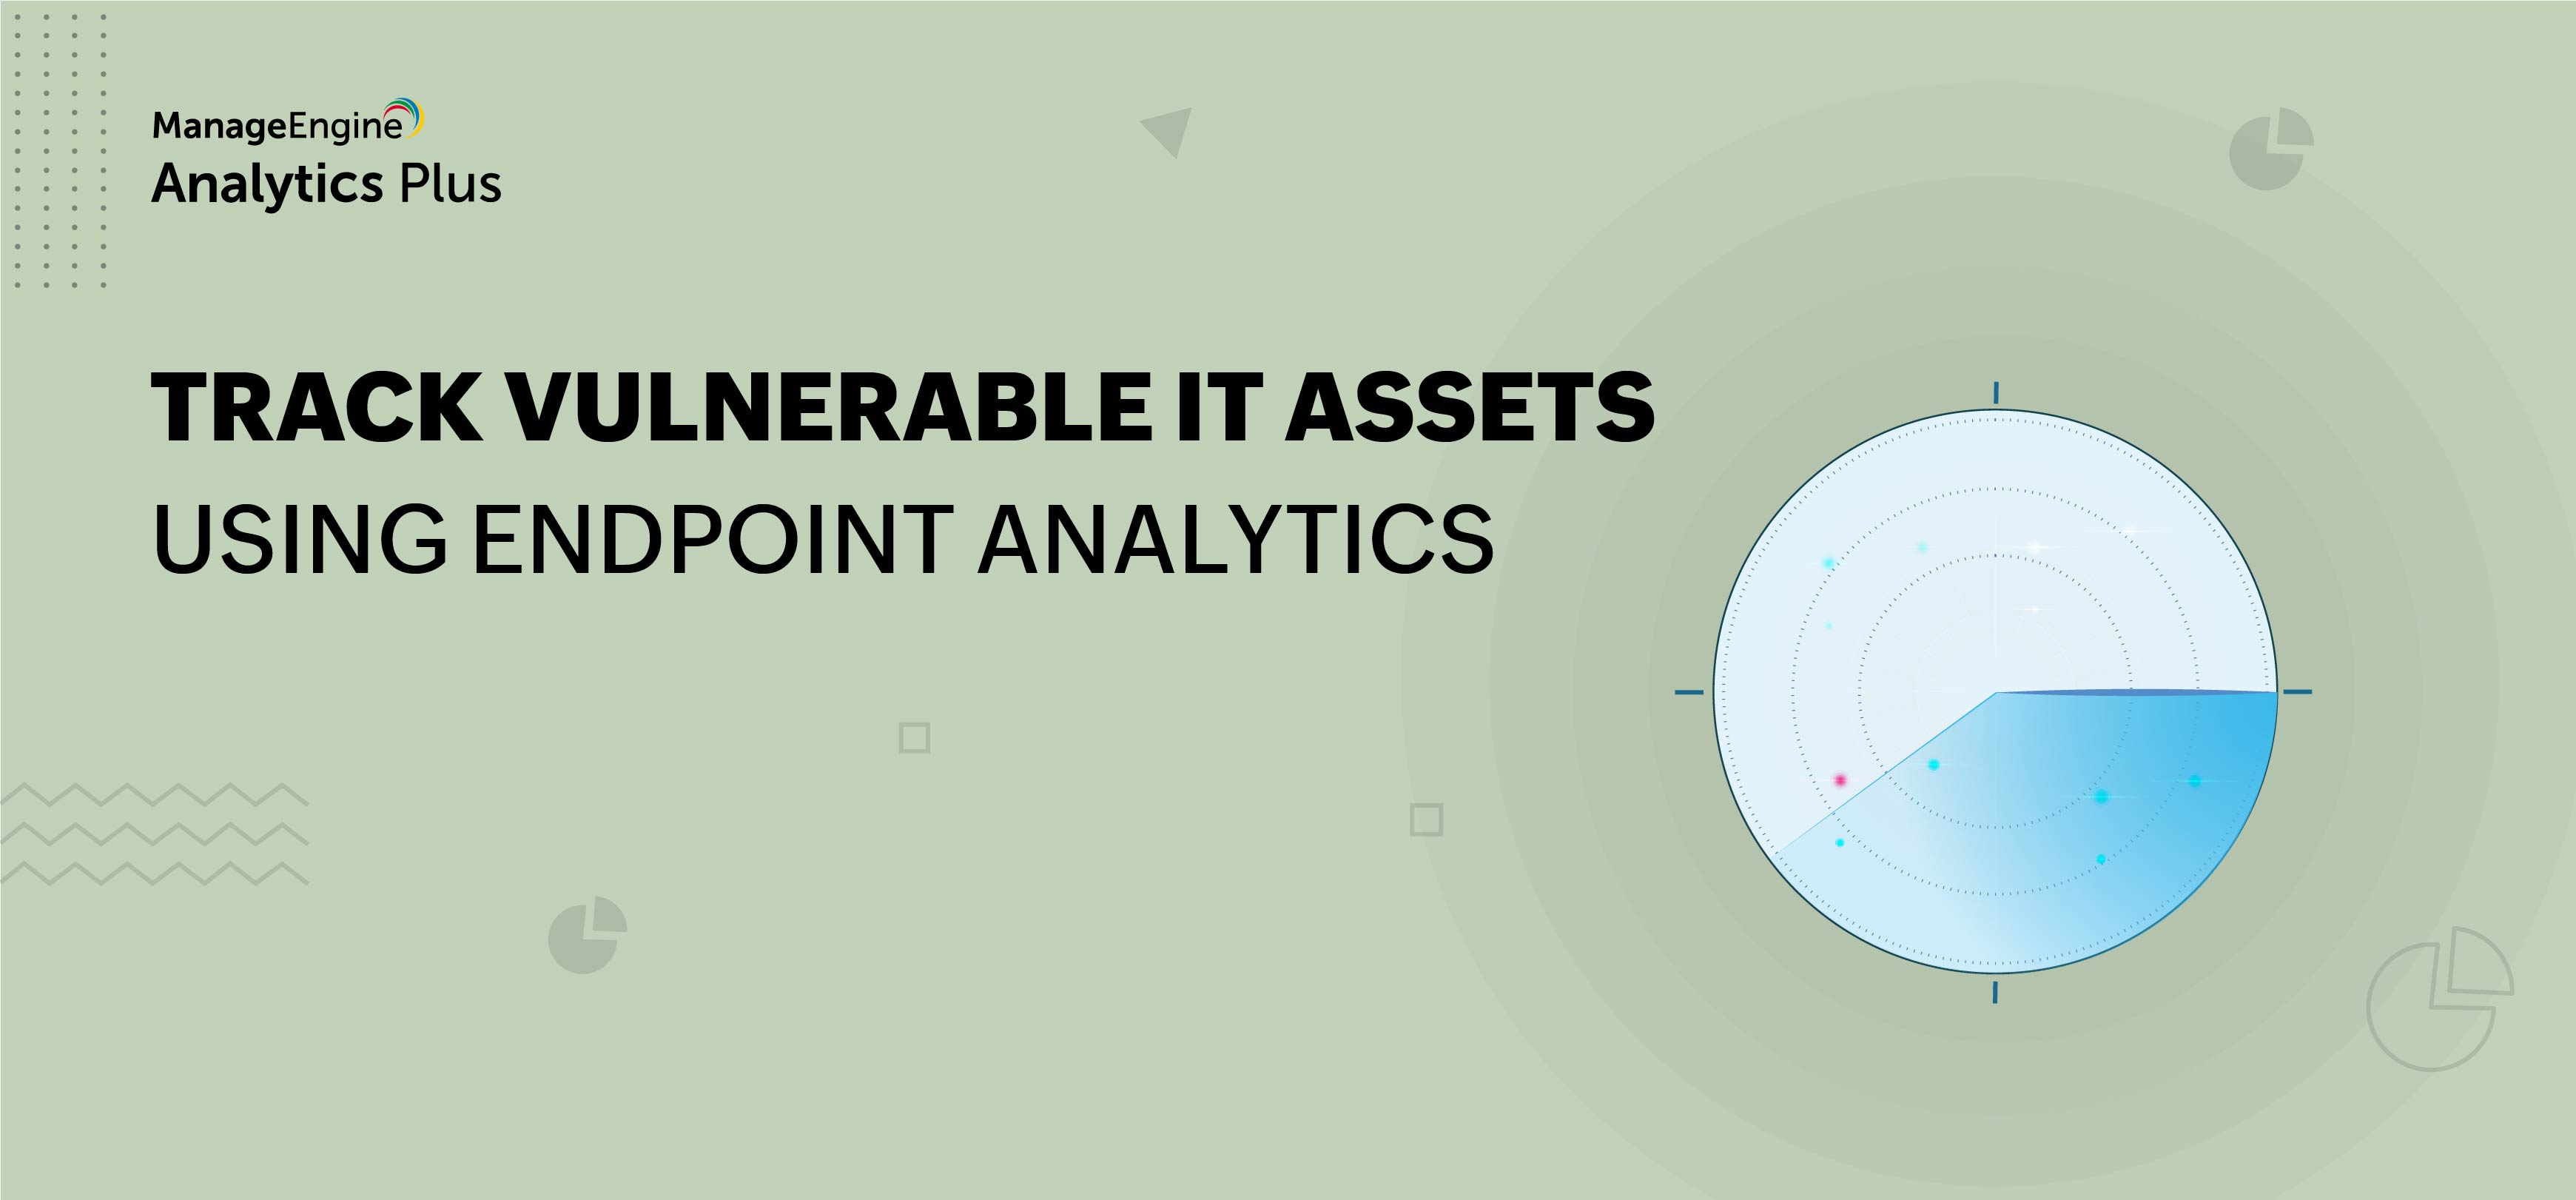 Track vulnerable assets using endpoint analytics